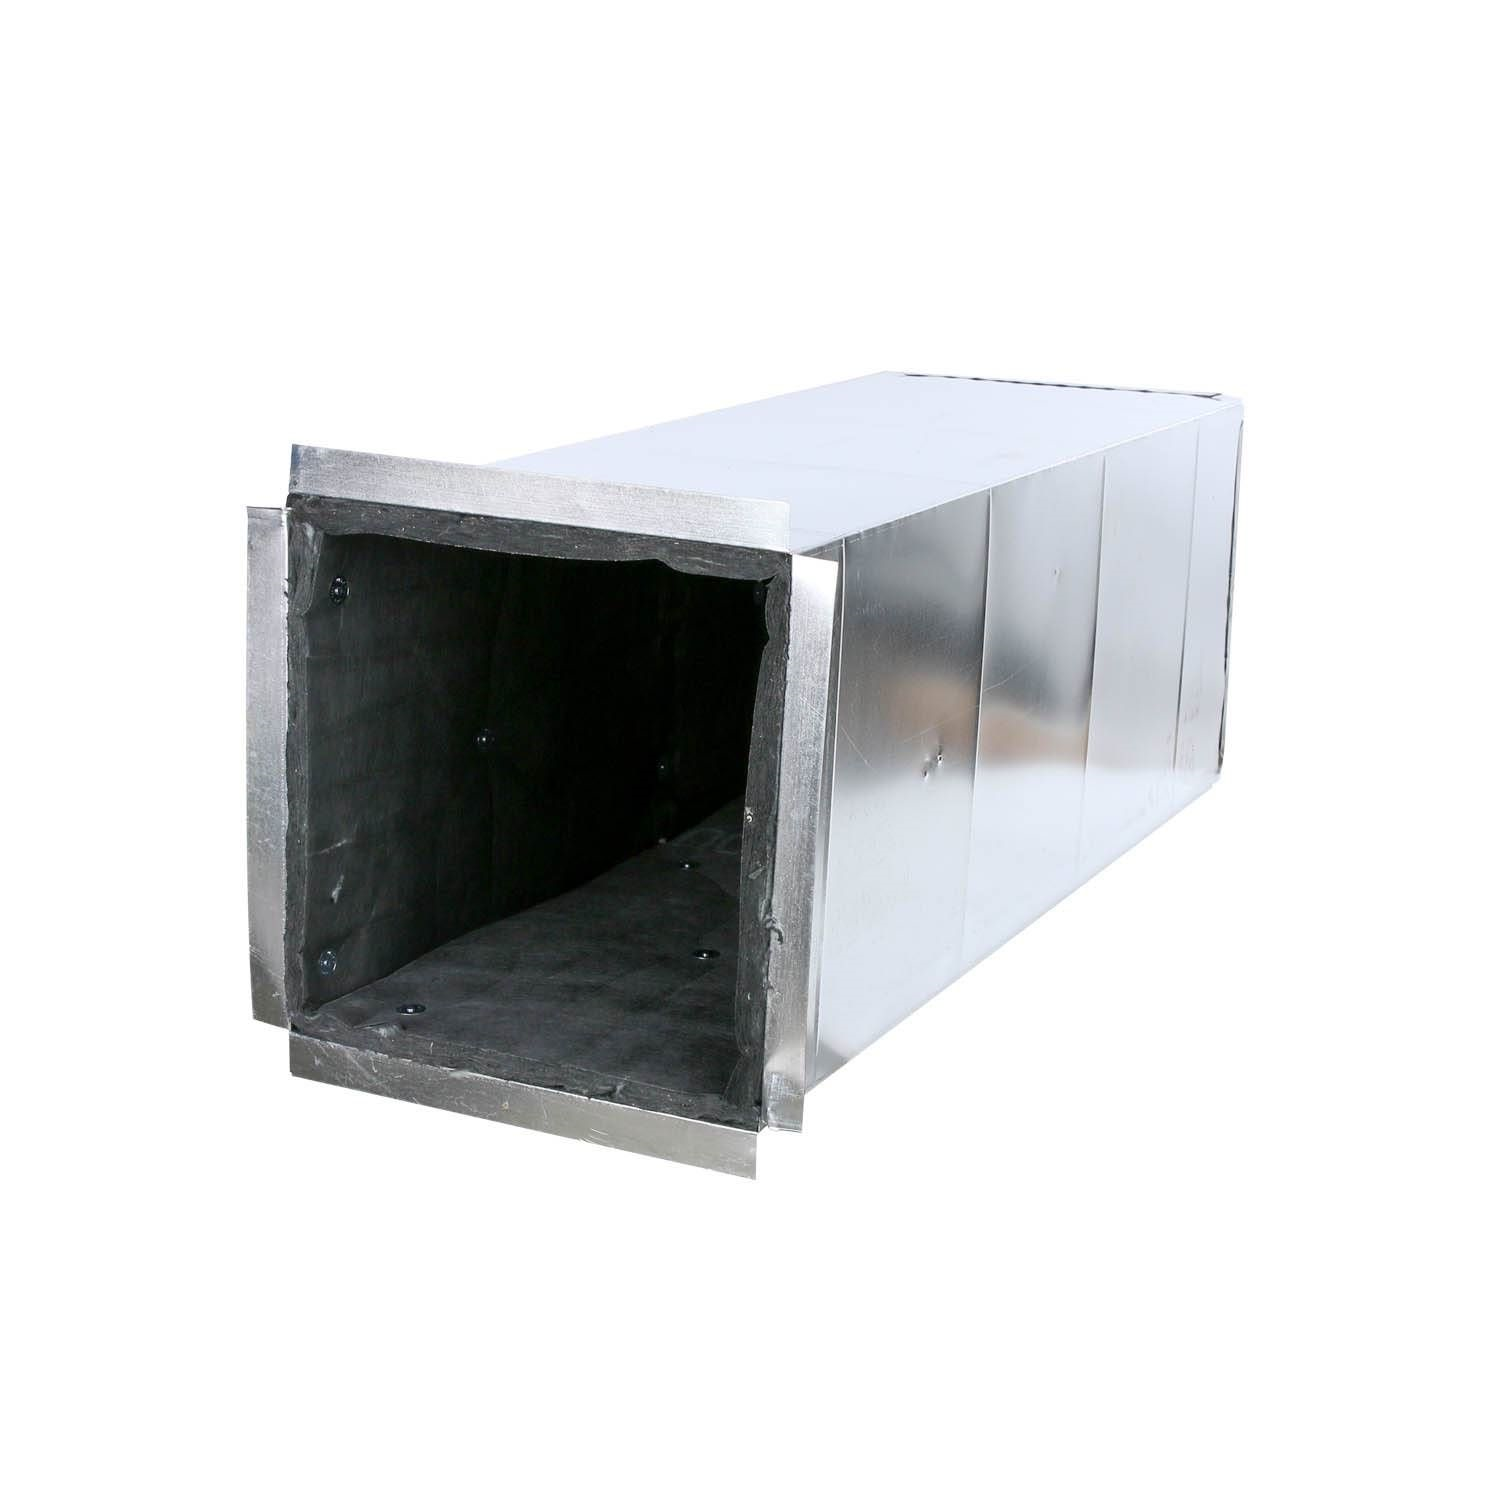 PLENUM 18X23X24 FITS EAC 20X25 - Plenums and Transitions